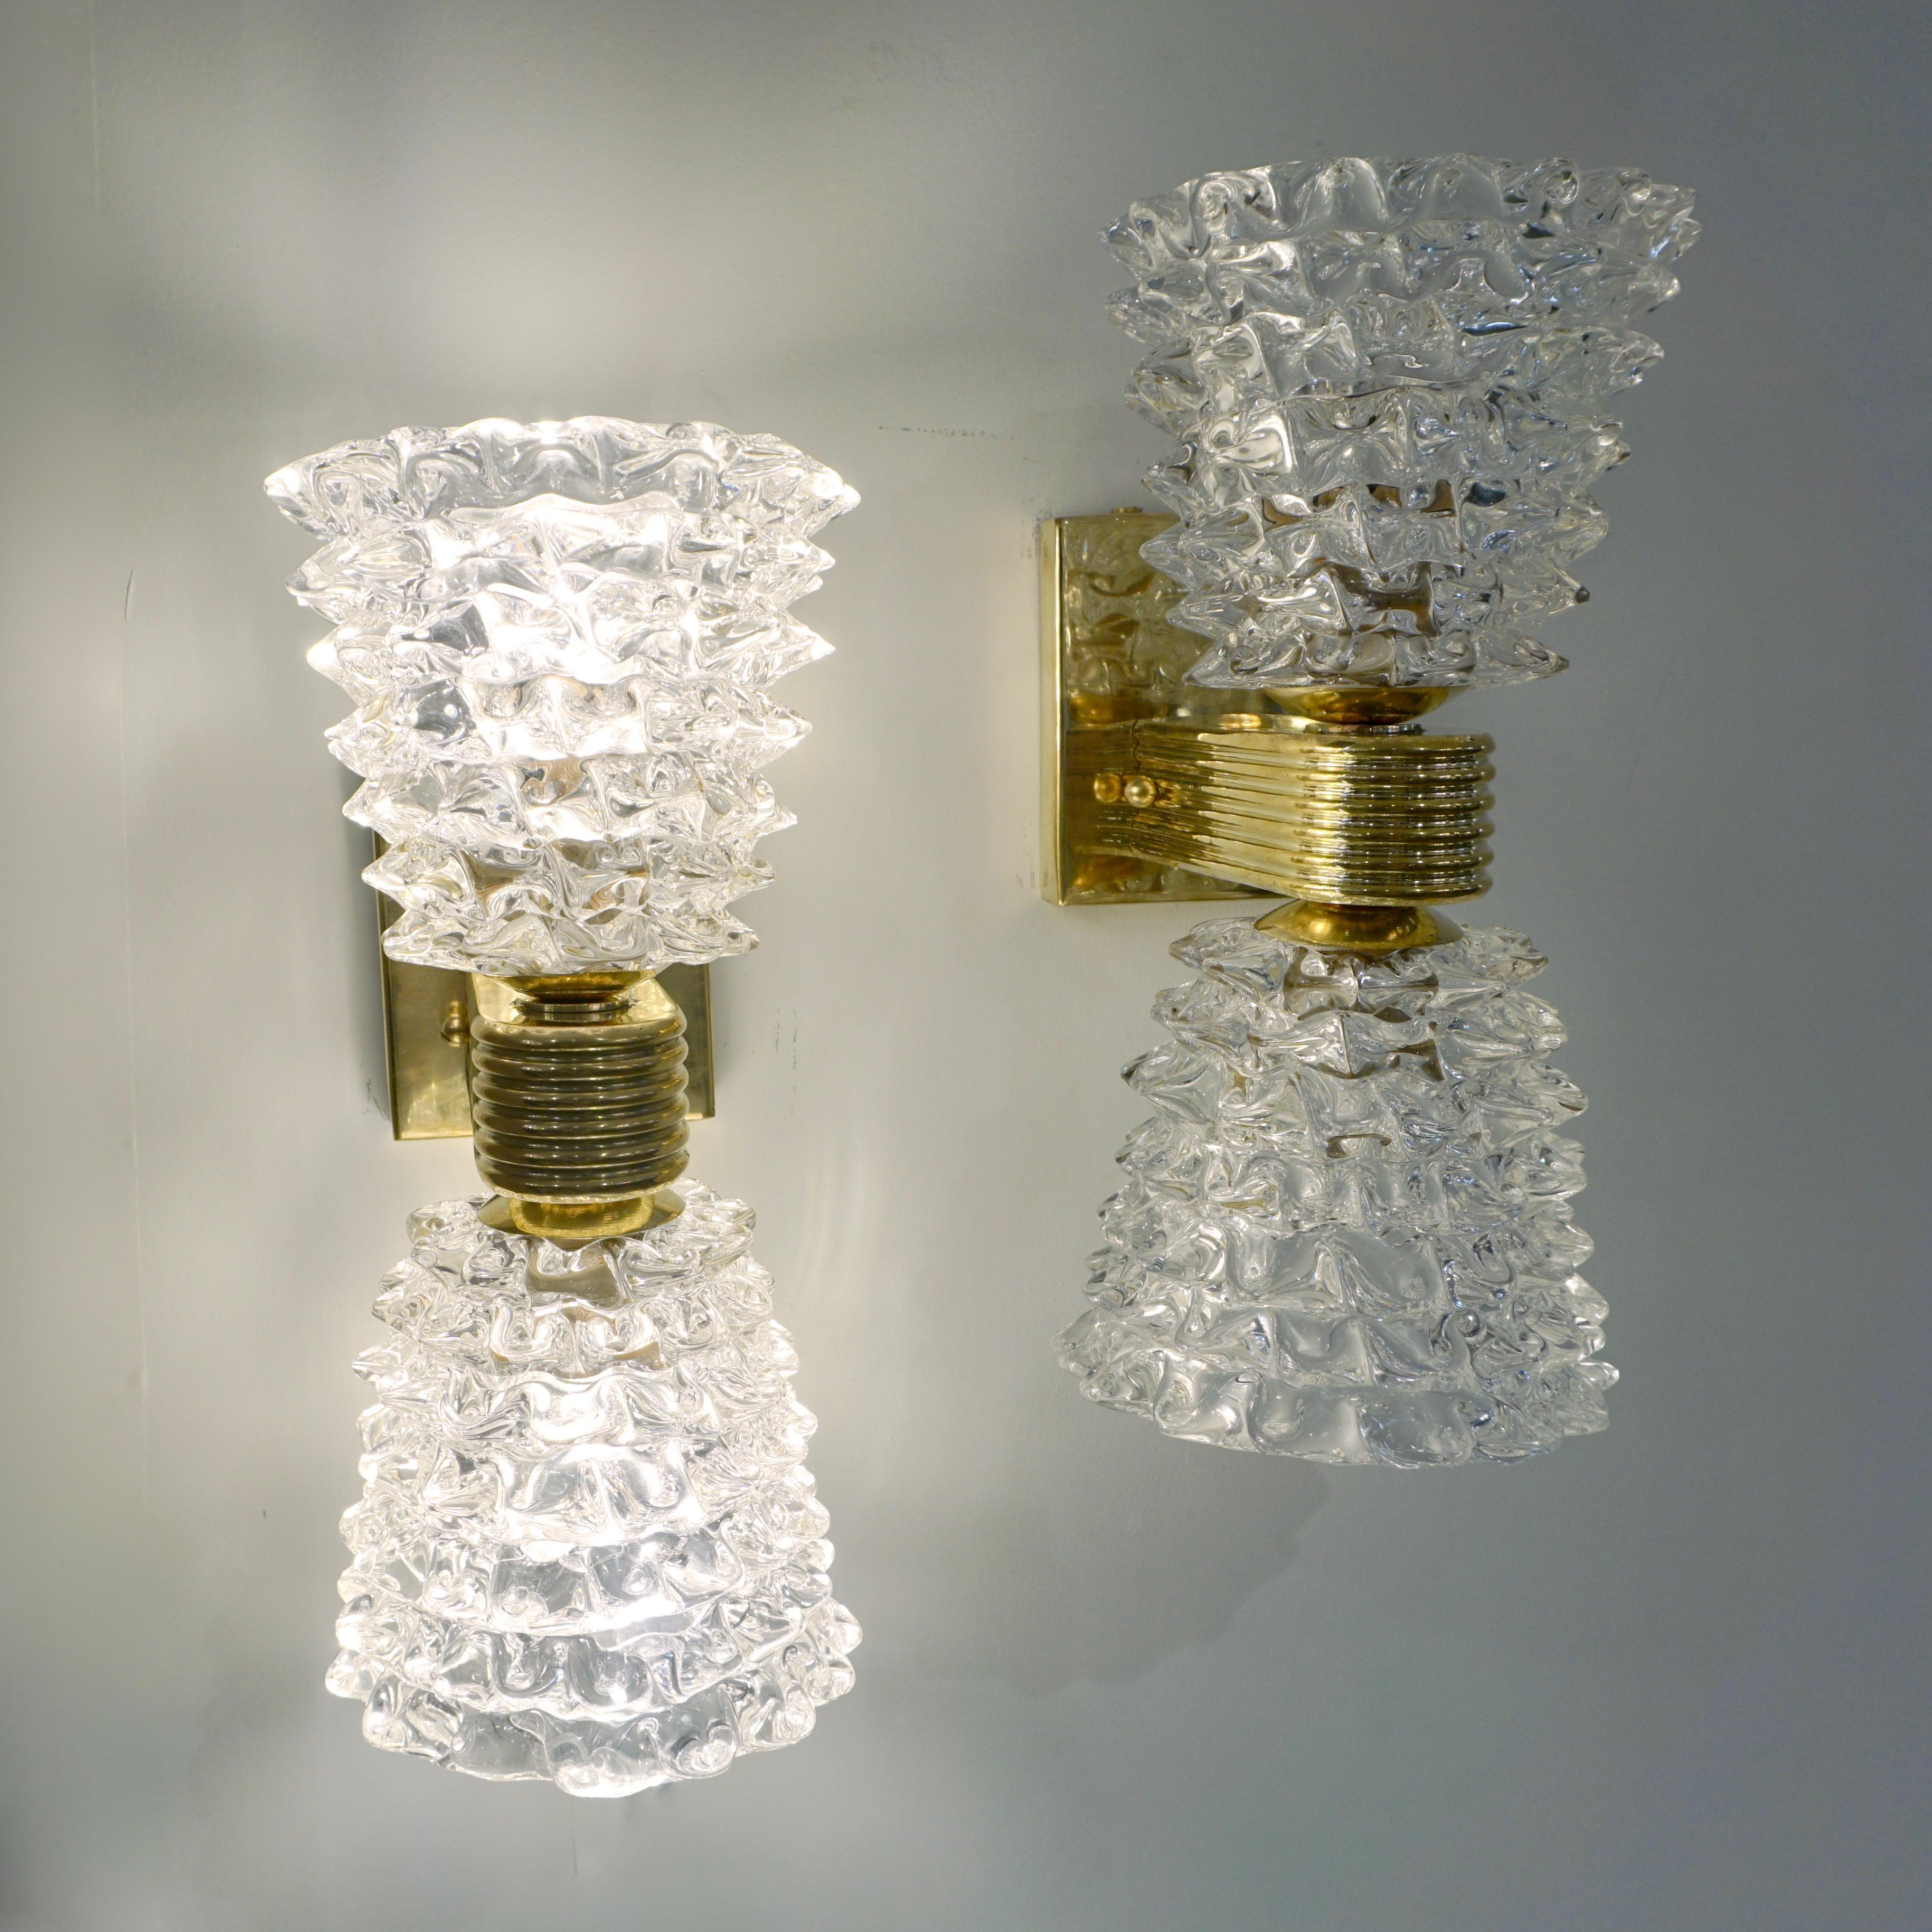 Contemporary Italian Rostrato Crystal Murano Glass & Brass Double-Lit Sconces For Sale 10